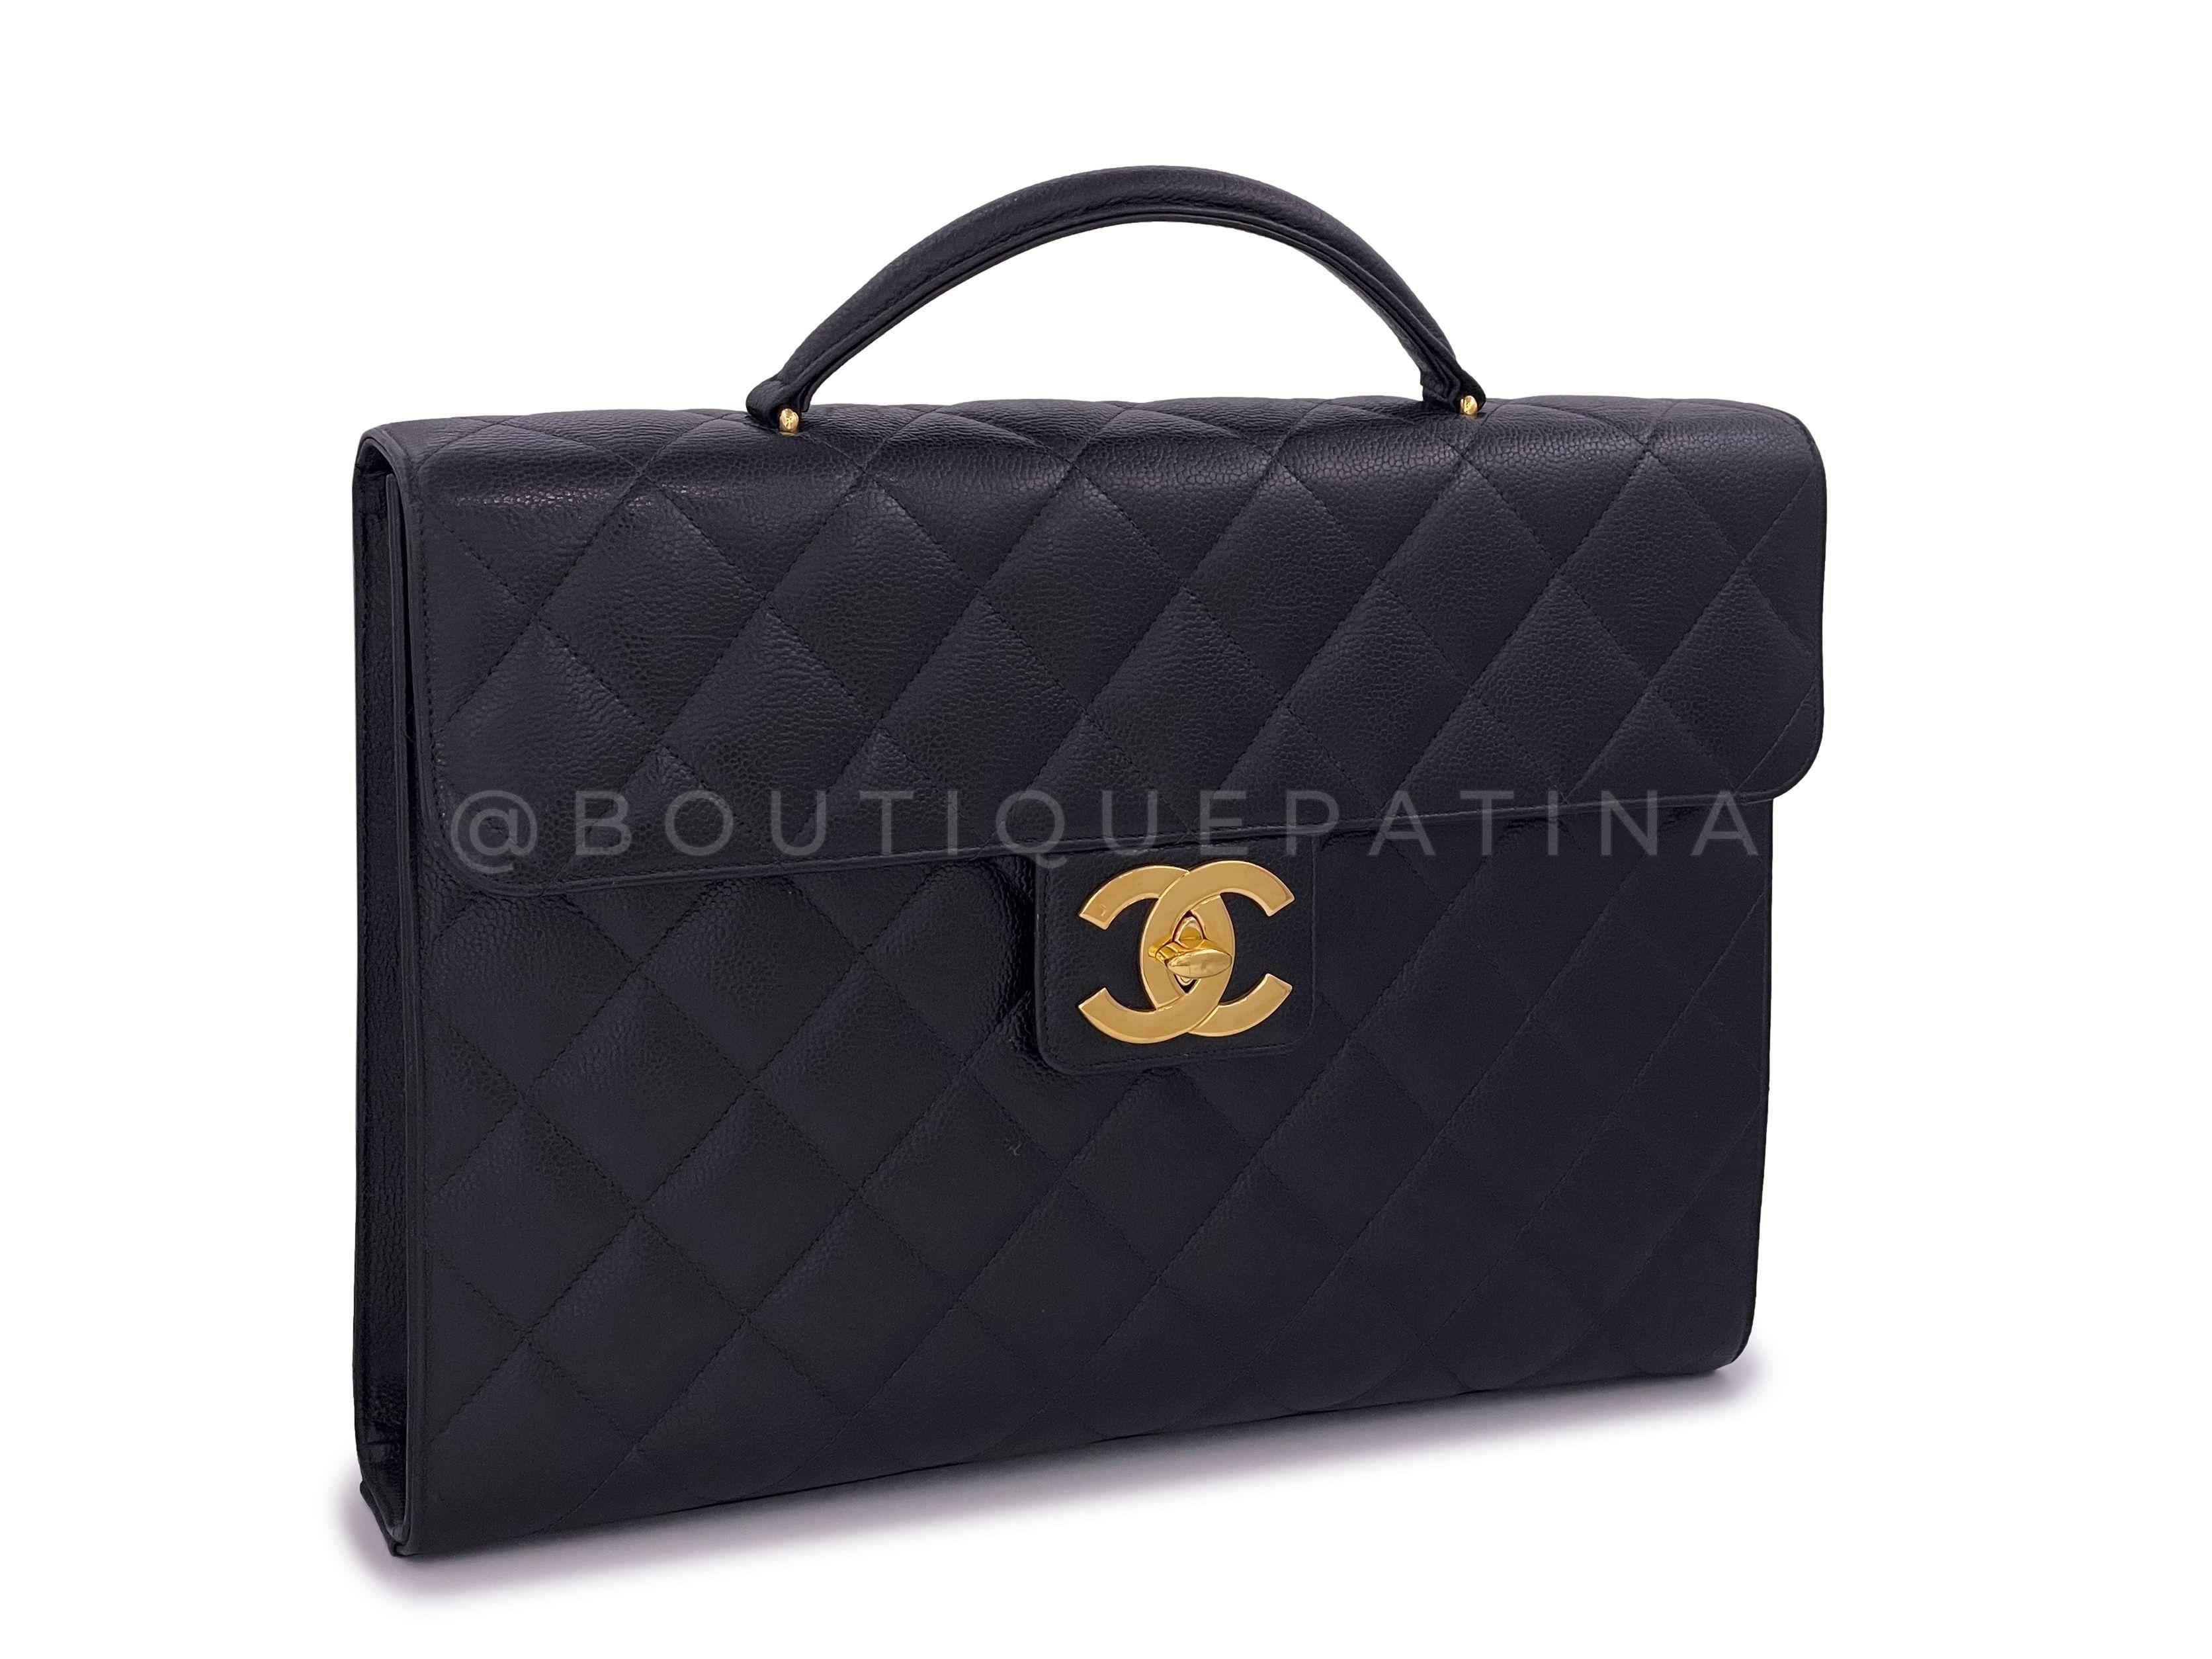 Store SKU: 64896
Vintage caviar bags are extremely hard to find -- usually vintage Chanel bags are in lambskin. The combination of the pebbled calfskin with the 24k gold plated hardware is a holy grail for many Chanel enthusiasts. 

A Chanel classic